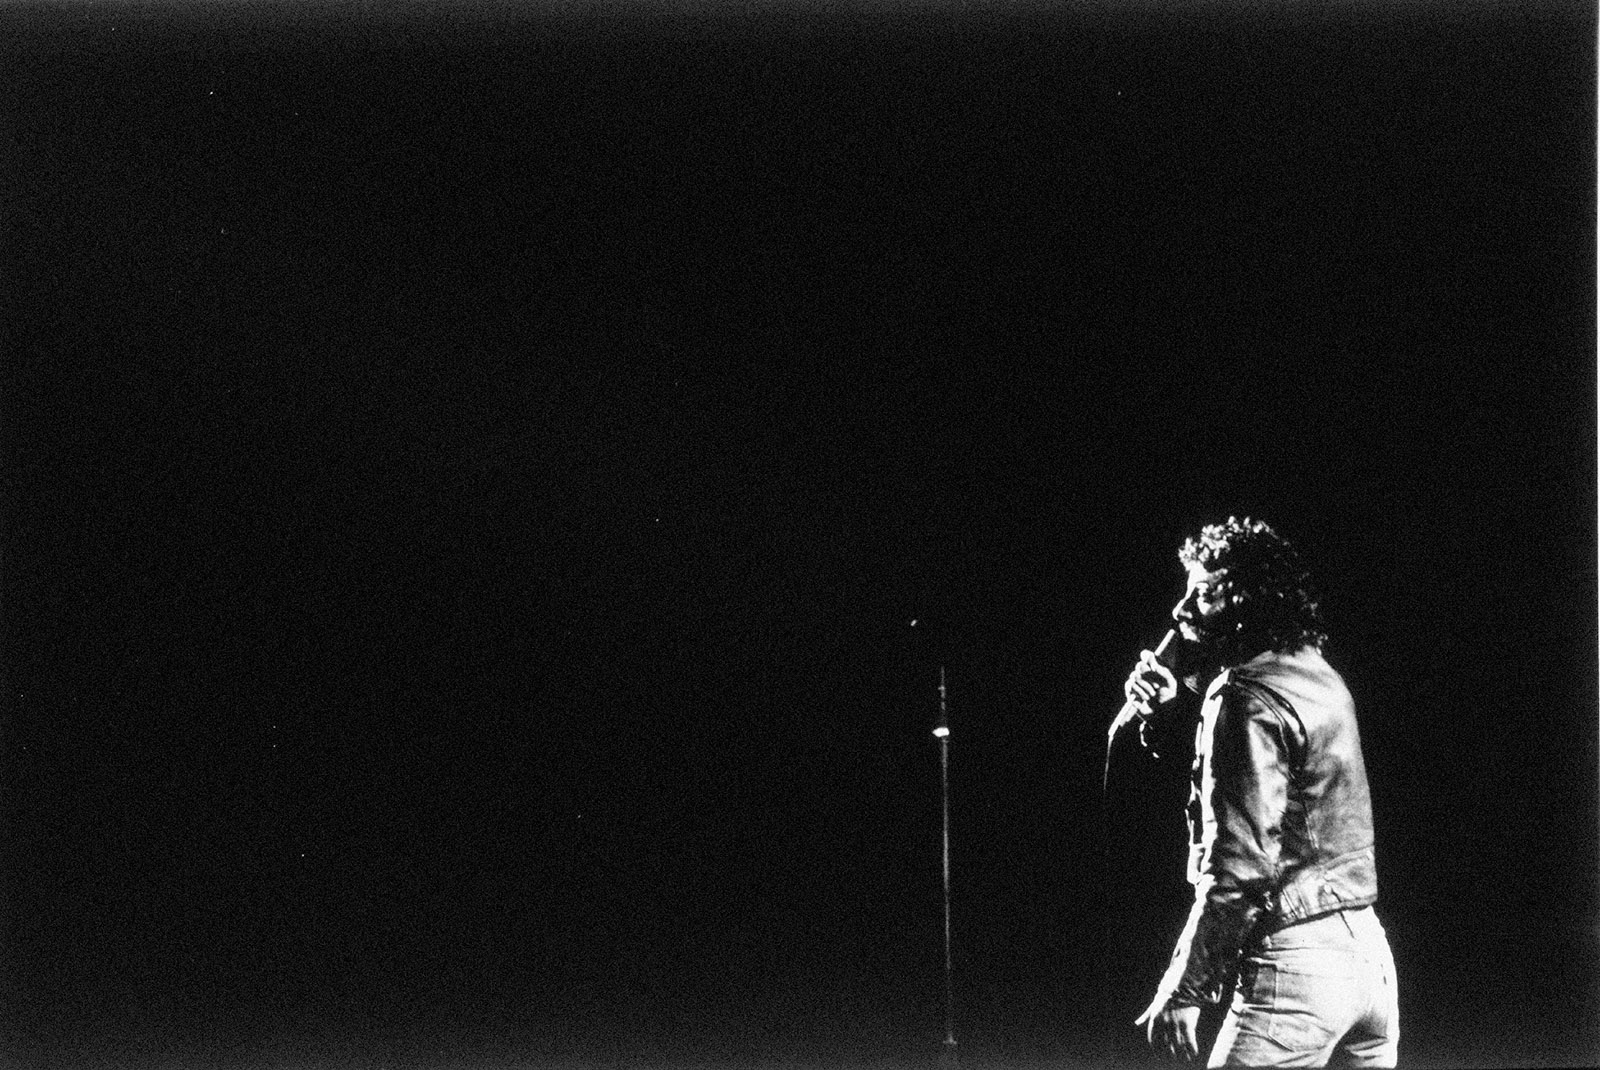 Bruce Springsteen performing at the Bottom Line, New York City, August 1975